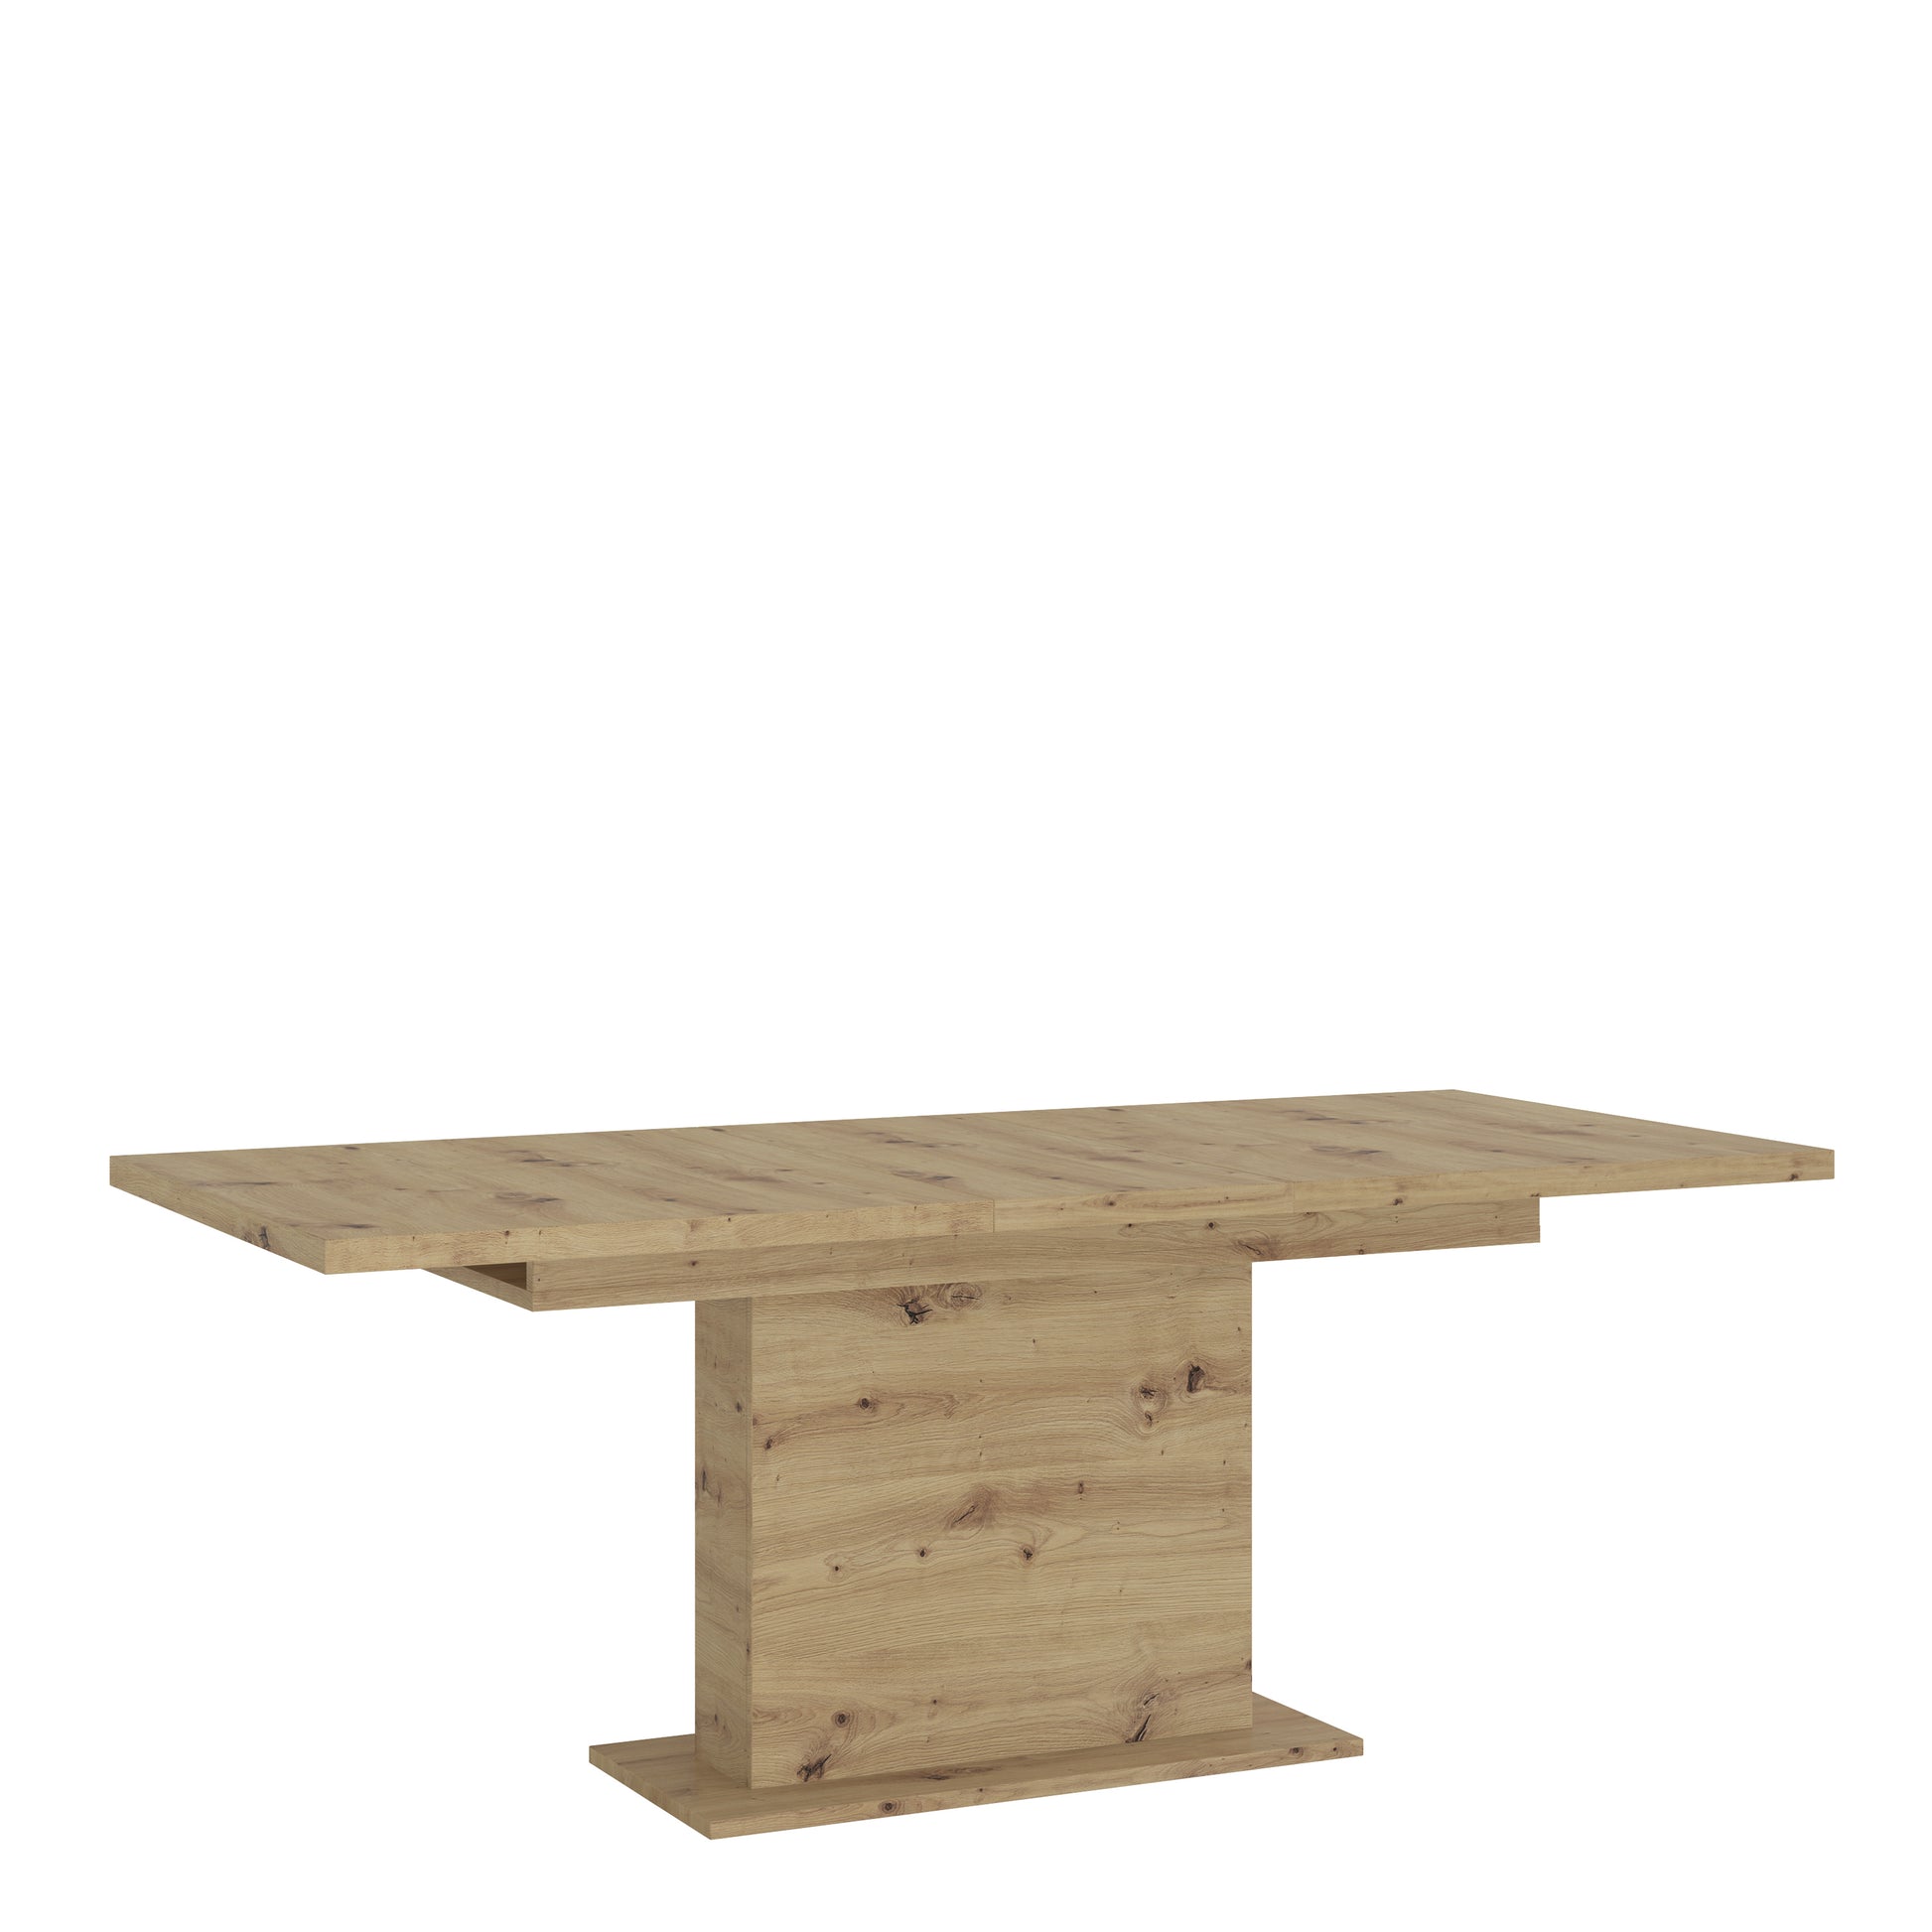 Luci Bright Luci extending dining table 160-200cm in White and Oak